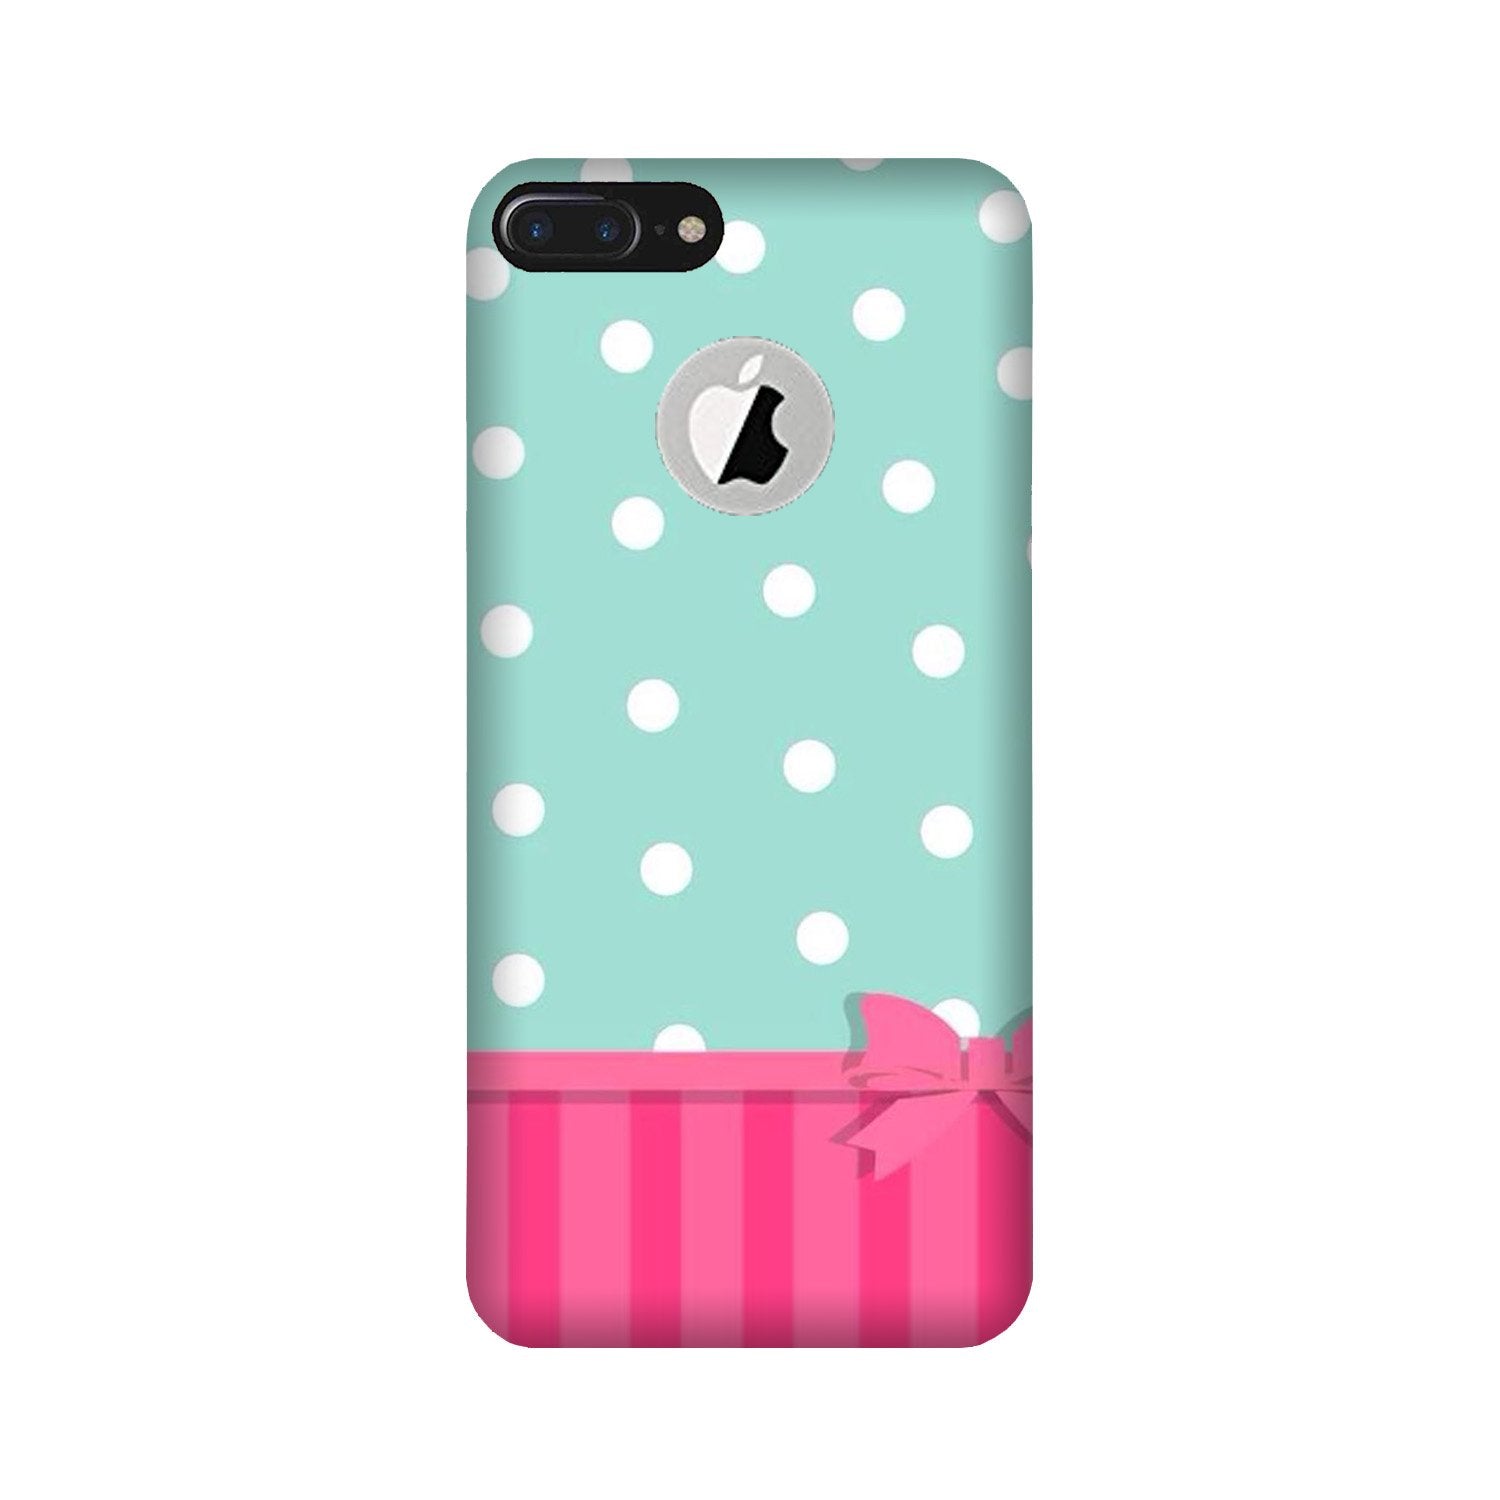 Gift Wrap Case for iPhone 7 Plus logo cut